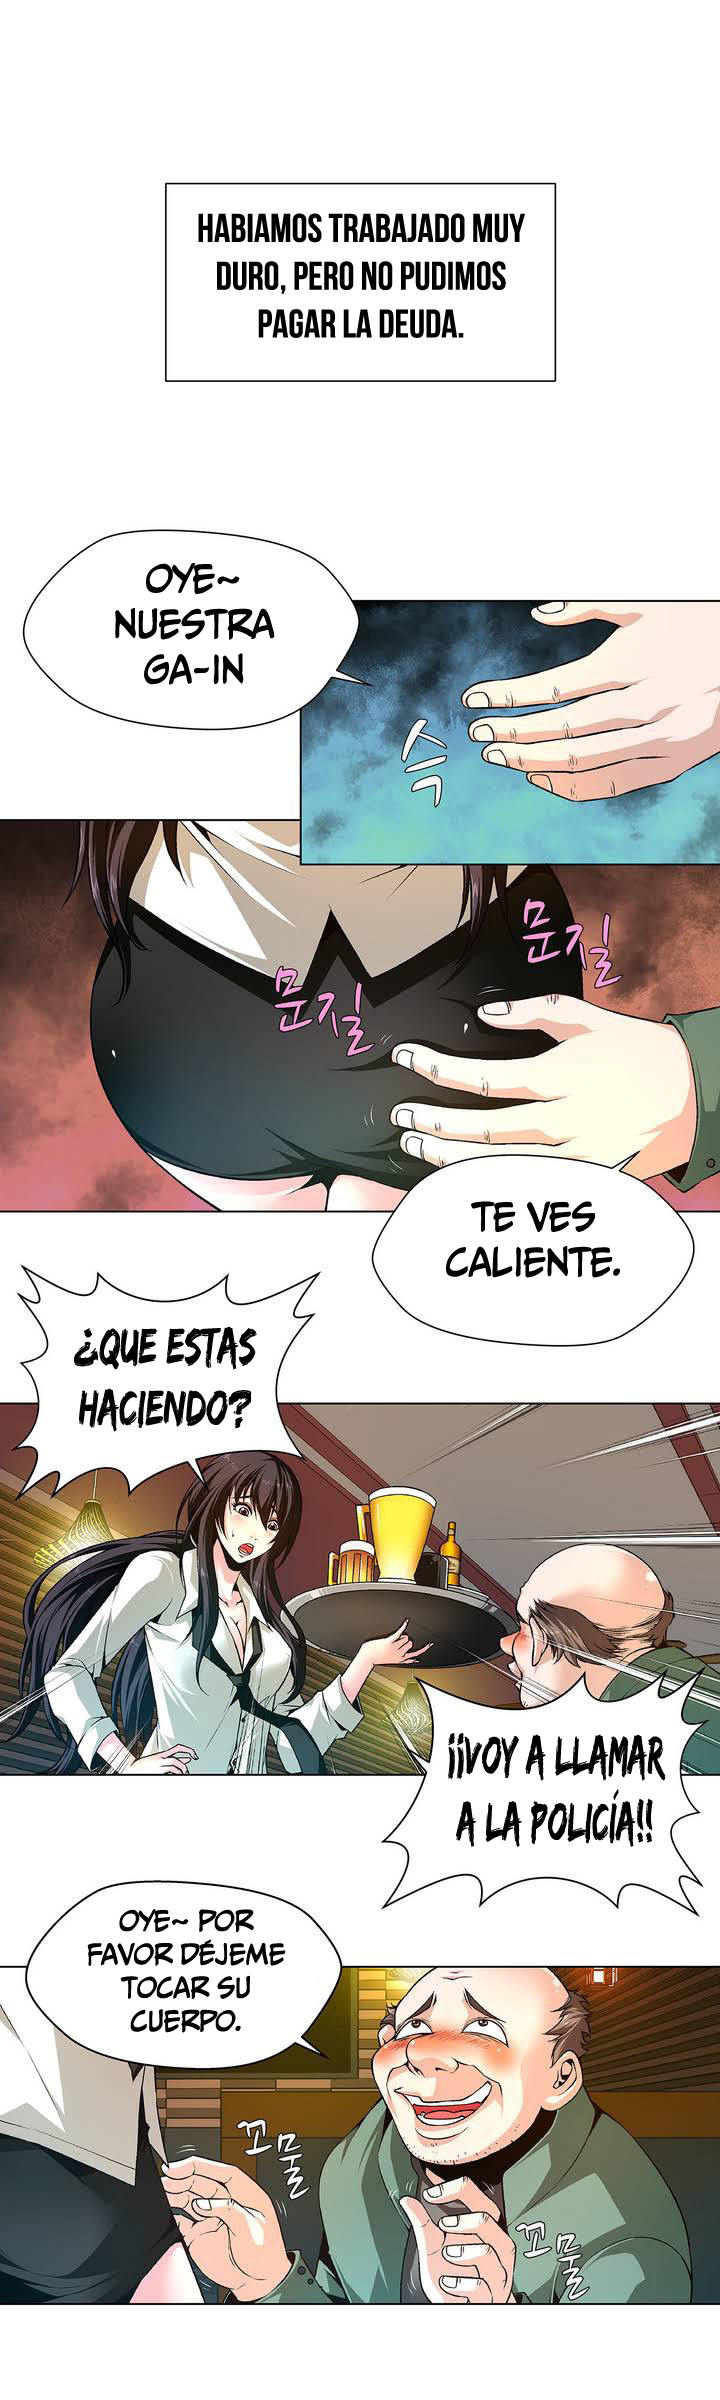 [Fantastic Whale] Twin Slave Ch.1-6 (Spanish)[Otakurinos FanSub](Ongoing) 